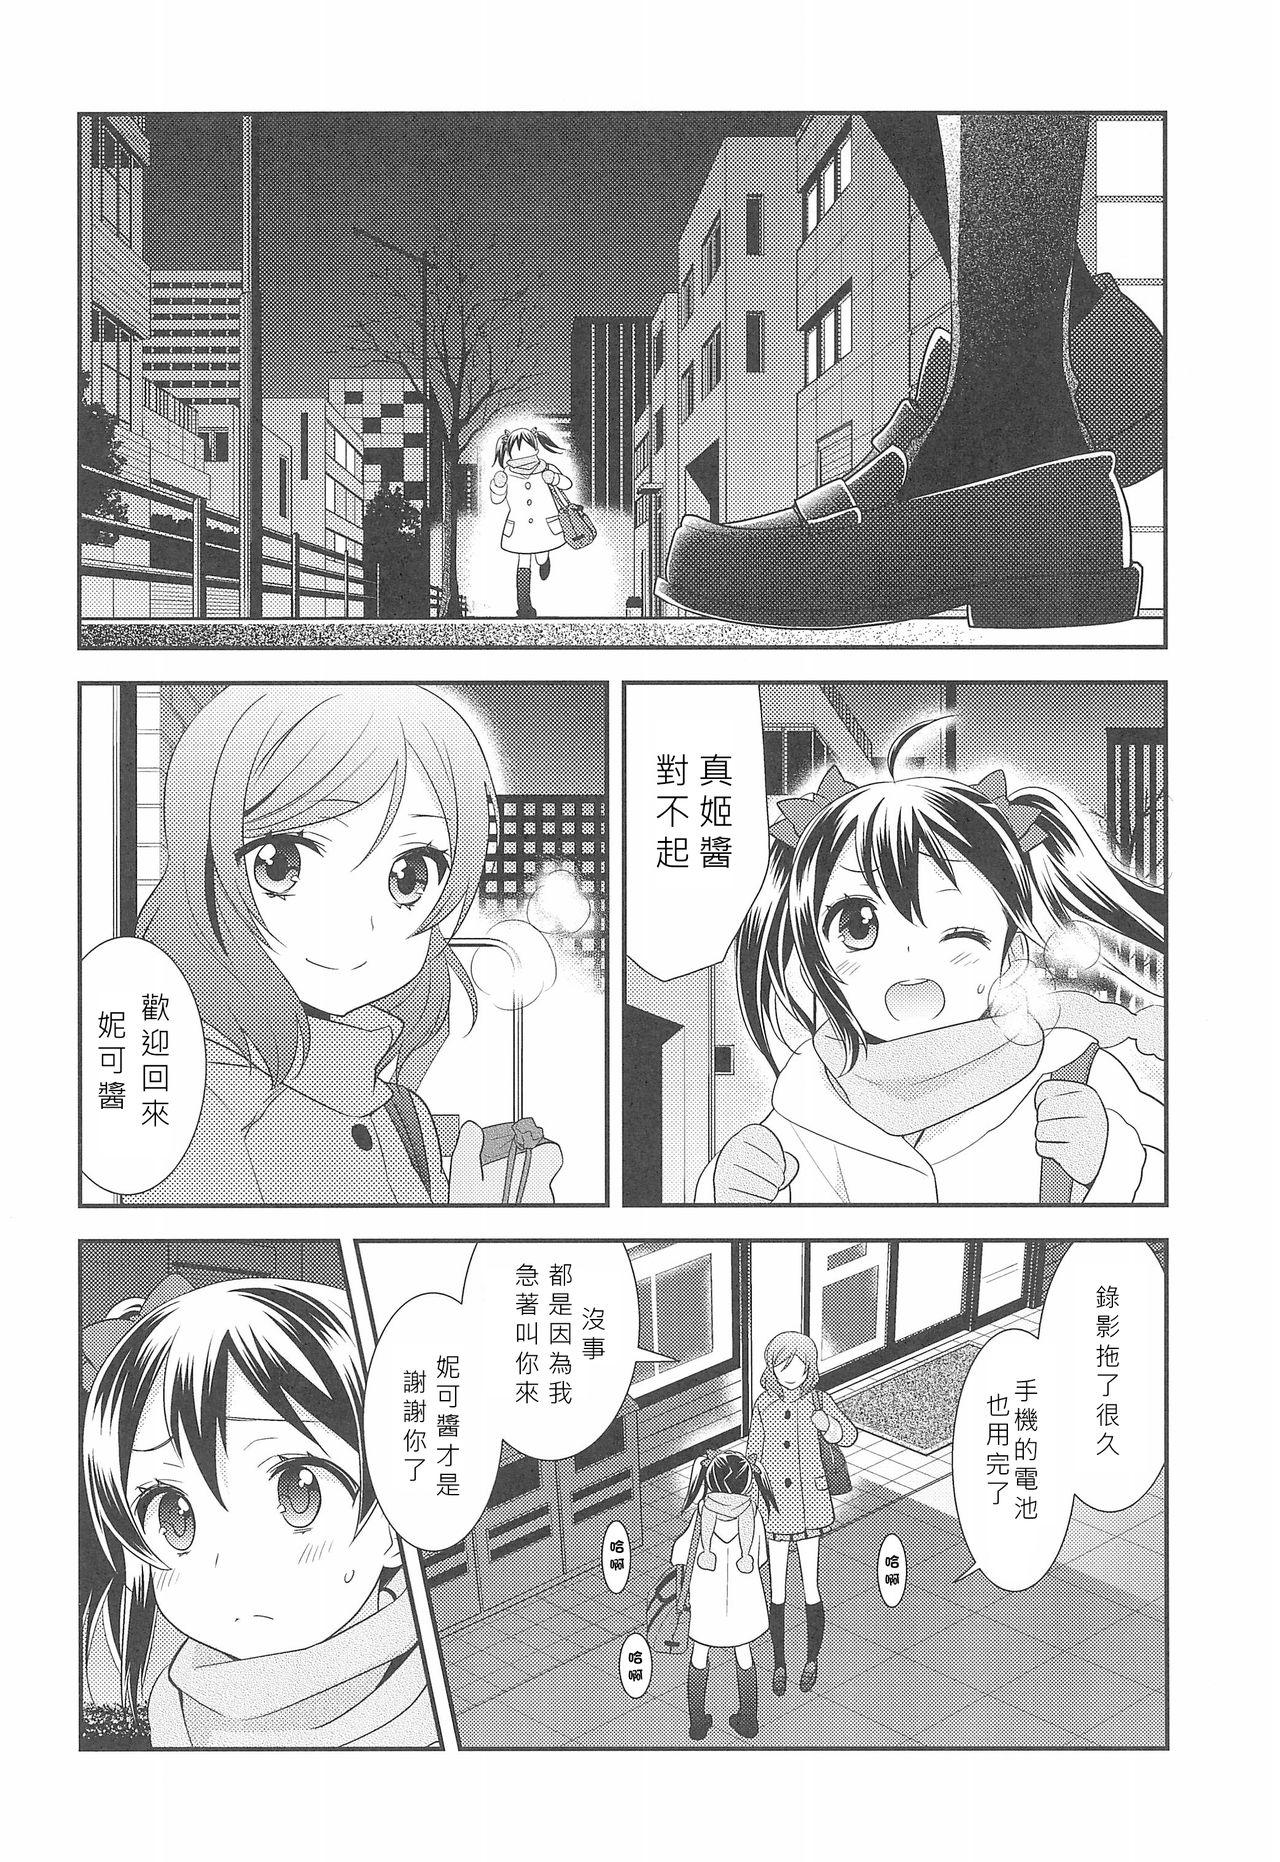 Little BABY I LOVE YOU - Love live Salope - Page 5